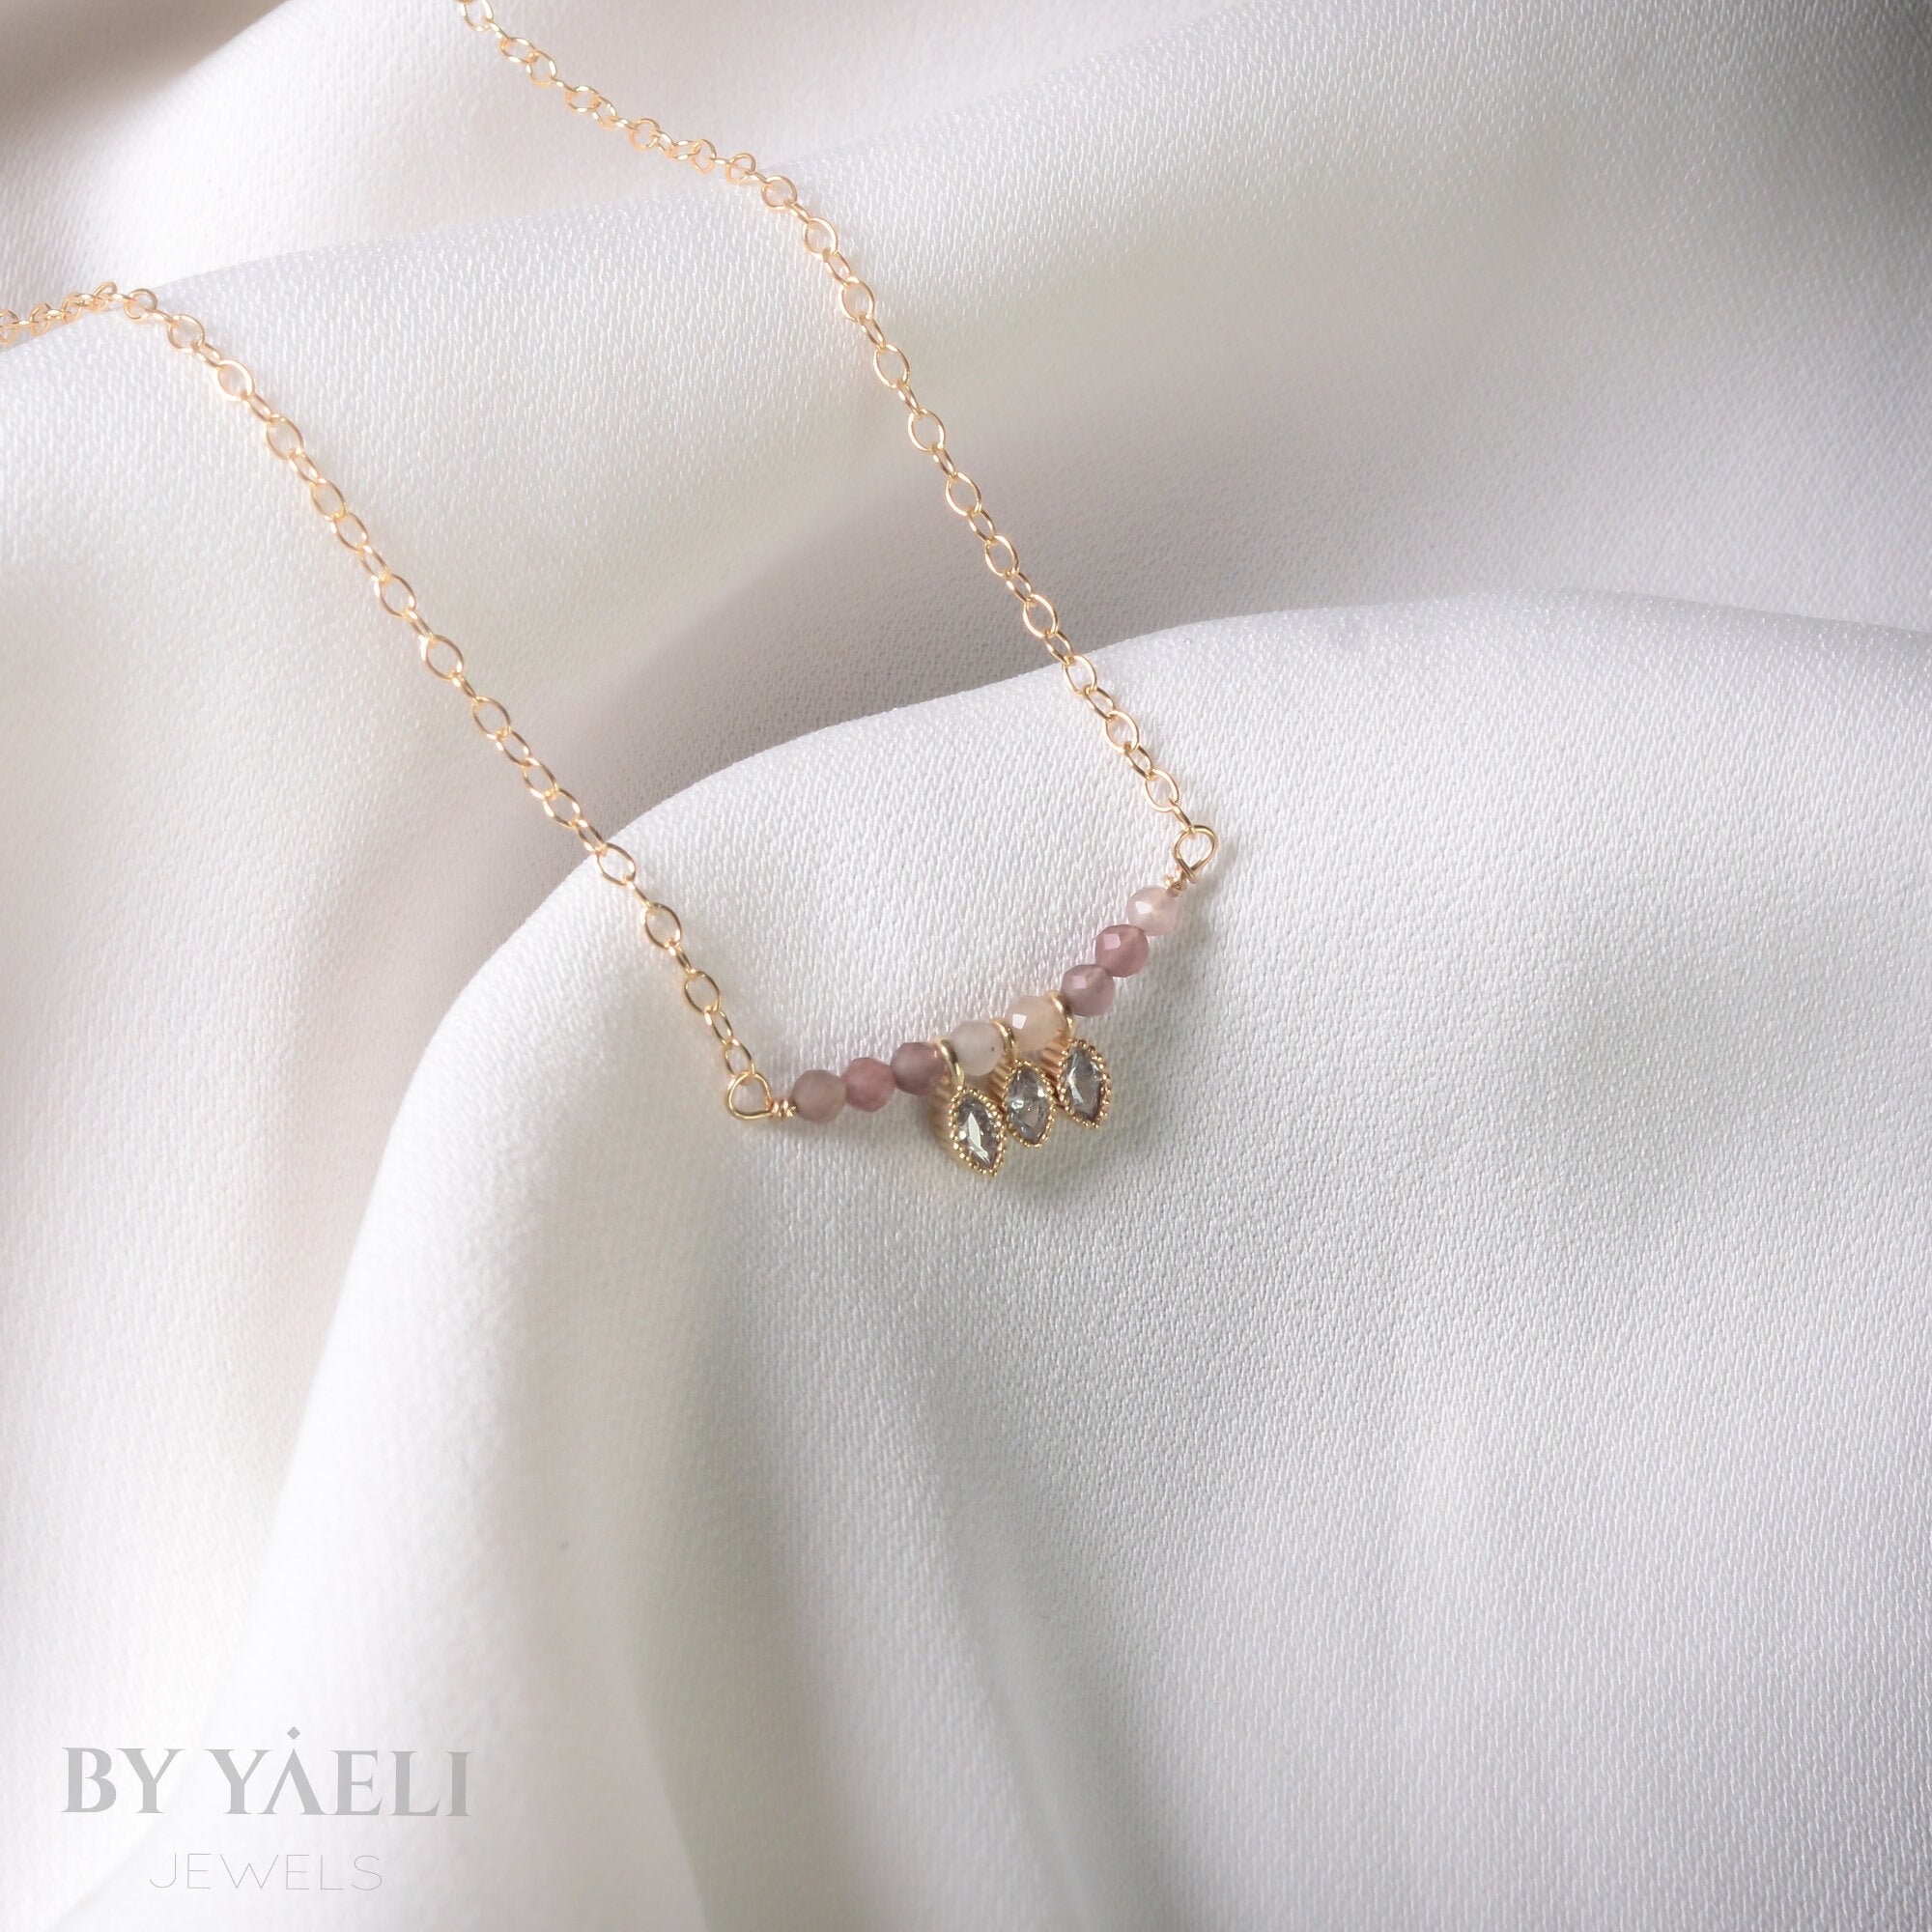 Dainty Pink Tourmaline Pendant Beaded Necklace Sterling Silver October Birthday Jewelry Gift for her